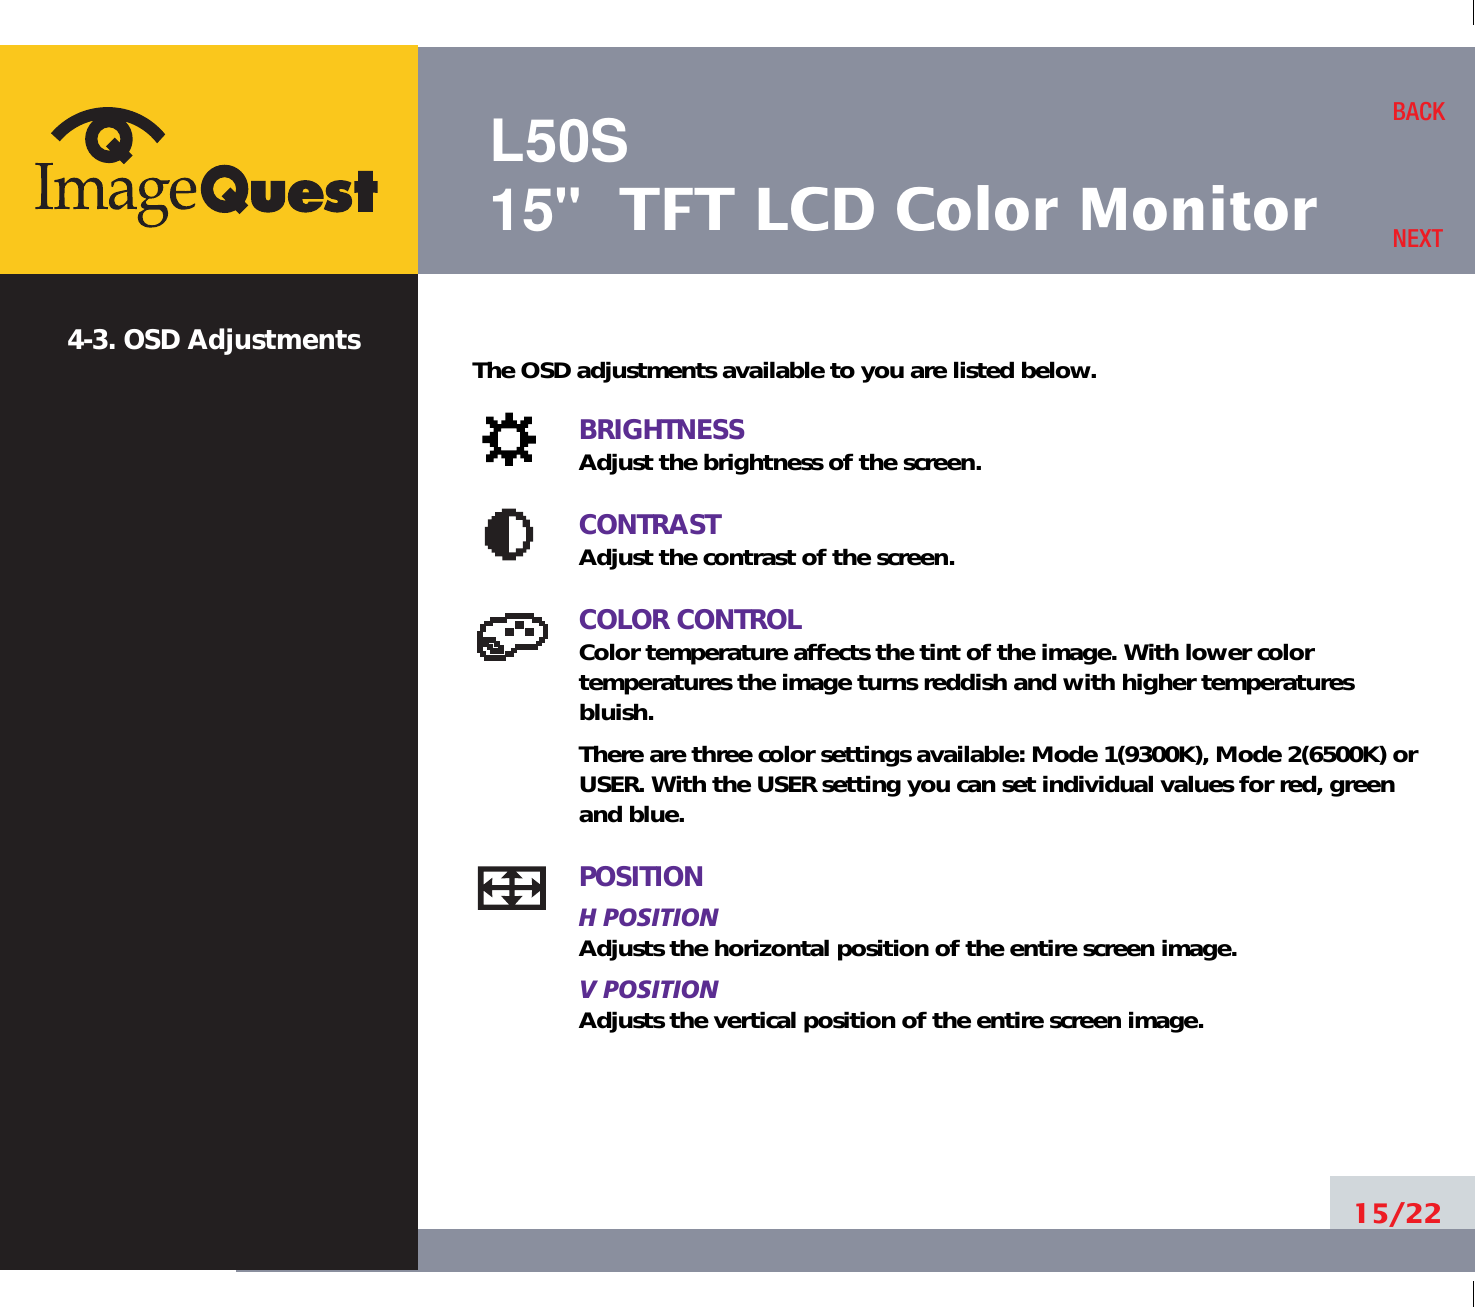 L50S15&quot; TFT LCD Color Monitor15/22BACKNEXT4-3. OSD Adjustments The OSD adjustments available to you are listed below.BRIGHTNESSAdjust the brightness of the screen.CONTRASTAdjust the contrast of the screen.COLOR CONTROLColor temperature affects the tint of the image. With lower color temperatures the image turns reddish and with higher temperatures bluish.There are three color settings available: Mode 1(9300K), Mode 2(6500K) orUSER. With the USER setting you can set individual values for red, greenand blue.POSITIONH POSITIONAdjusts the horizontal position of the entire screen image.V POSITIONAdjusts the vertical position of the entire screen image.